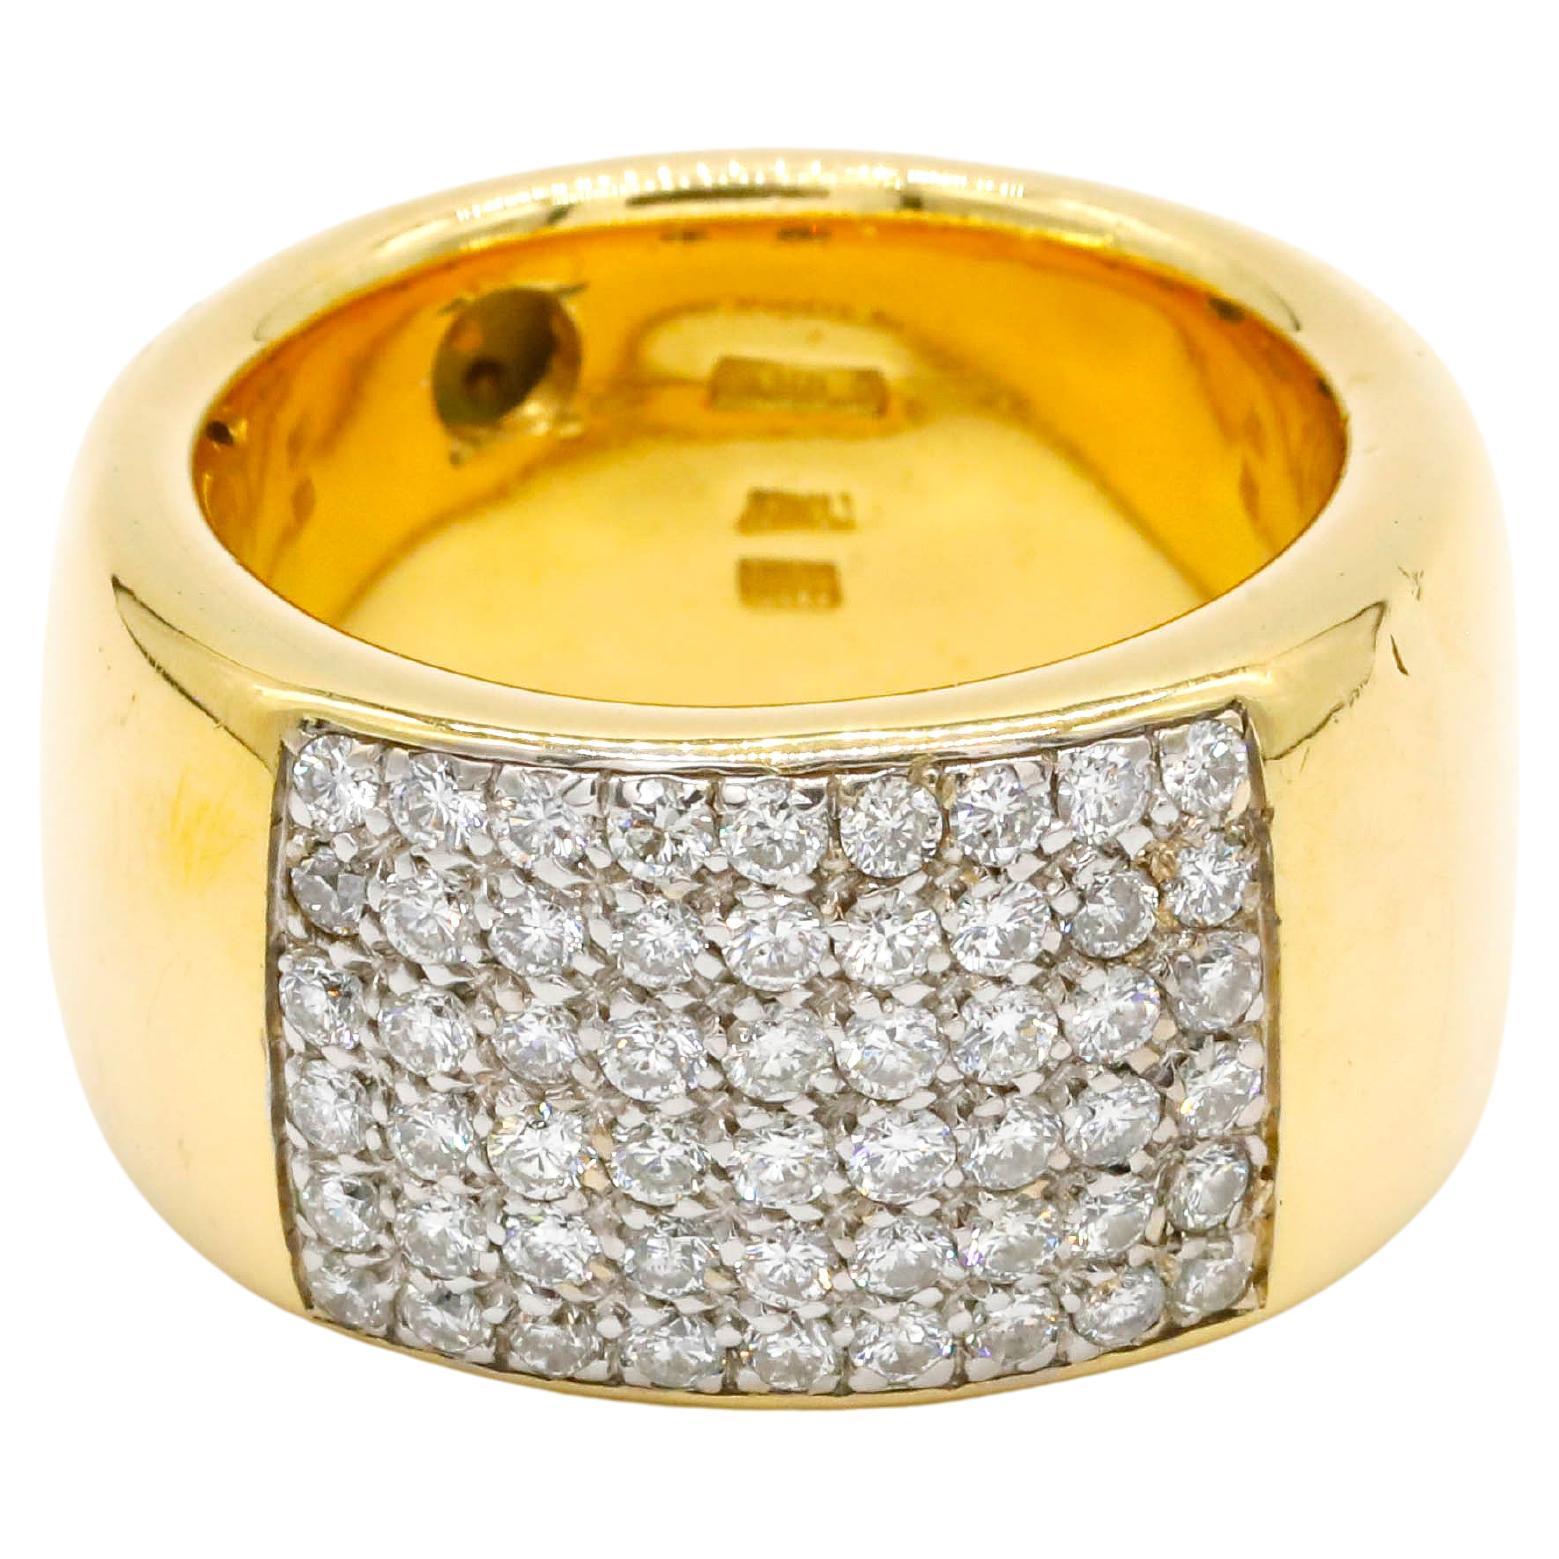 1.00 Carat Round Cut Diamond Pave in 18k Yellow Gold Fine Engagement Band Ring

This modern ring features a total of 1.00 carats of diamond round shape Set in 18K Yellow Gold.

We guarantee all products sold and our number one priority is your